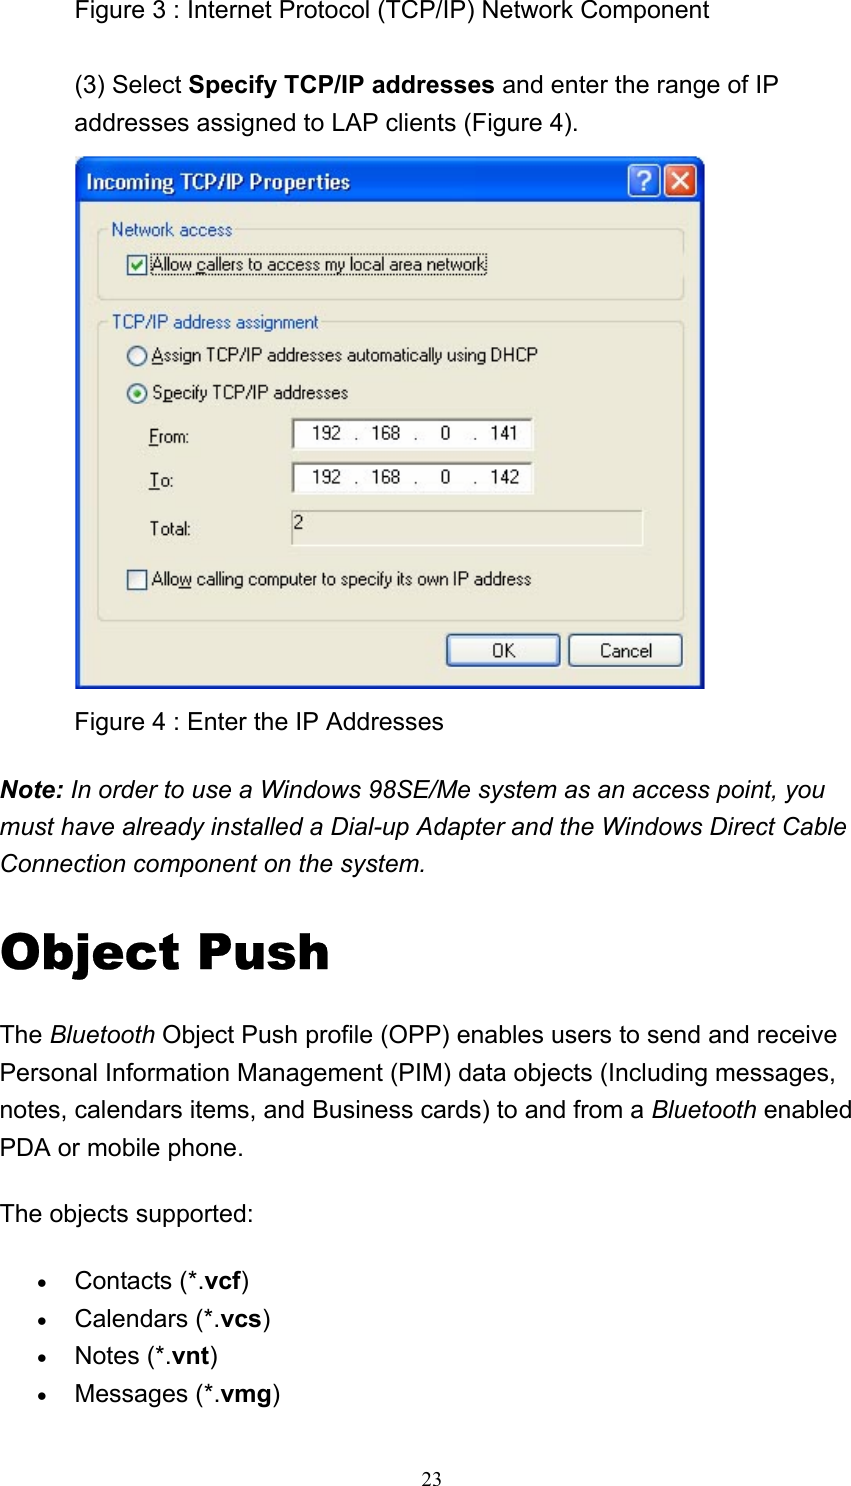   23Figure 3 : Internet Protocol (TCP/IP) Network Component  (3) Select Specify TCP/IP addresses and enter the range of IP addresses assigned to LAP clients (Figure 4).  Figure 4 : Enter the IP Addresses   Note: In order to use a Windows 98SE/Me system as an access point, you must have already installed a Dial-up Adapter and the Windows Direct Cable Connection component on the system.  Object Push The Bluetooth Object Push profile (OPP) enables users to send and receive Personal Information Management (PIM) data objects (Including messages, notes, calendars items, and Business cards) to and from a Bluetooth enabled PDA or mobile phone. The objects supported: • Contacts (*.vcf)  • Calendars (*.vcs)  • Notes (*.vnt)  • Messages (*.vmg)  